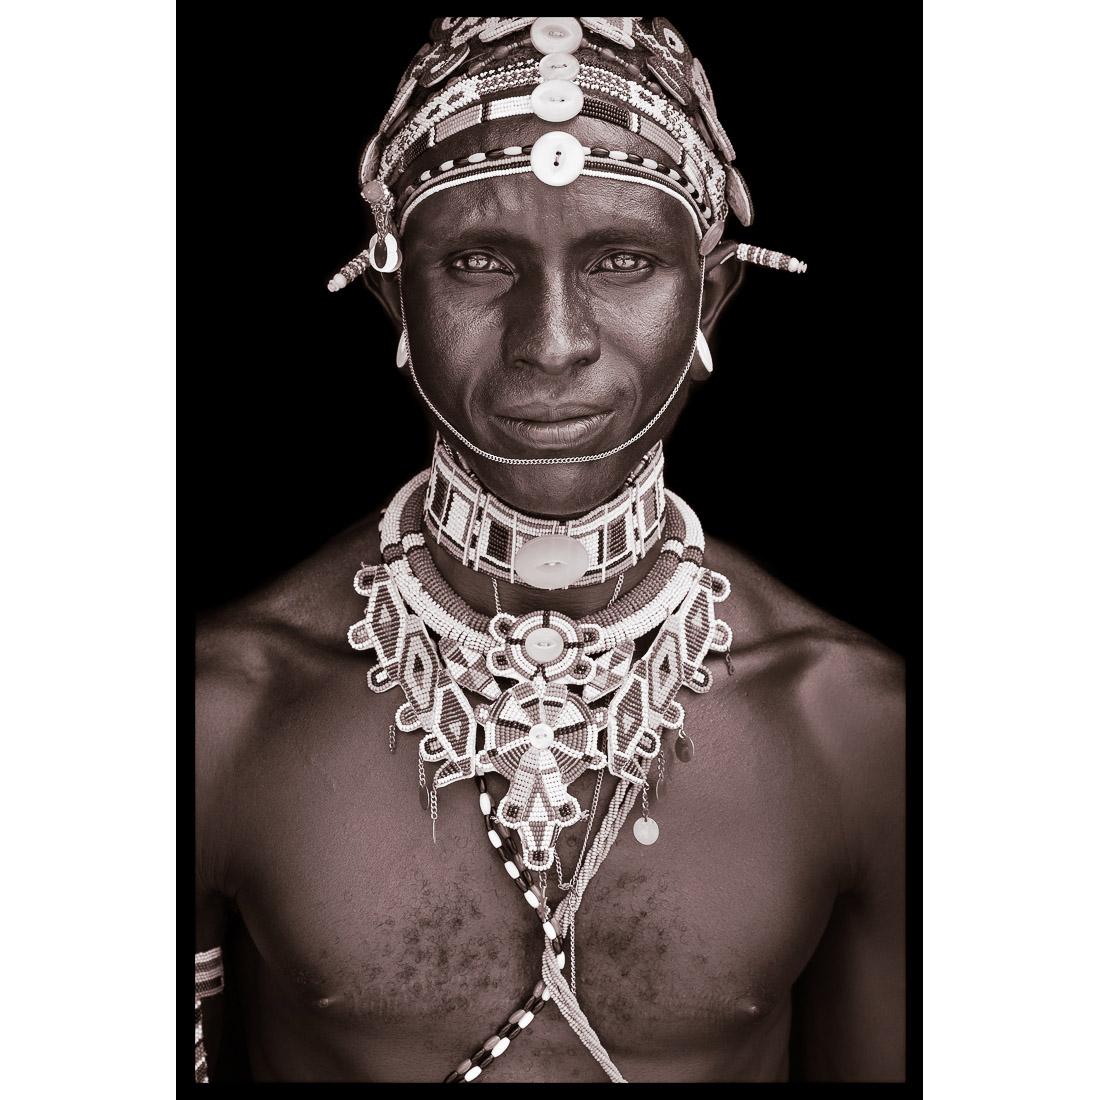 A portrait of Kakuwsa, a Rendille man from northern Kenya in 2019.

John Kenny’s work is all shot on location in some of the remotest corners of Africa. His images are all taken with natural light and his subjects in their day to day attire.

The